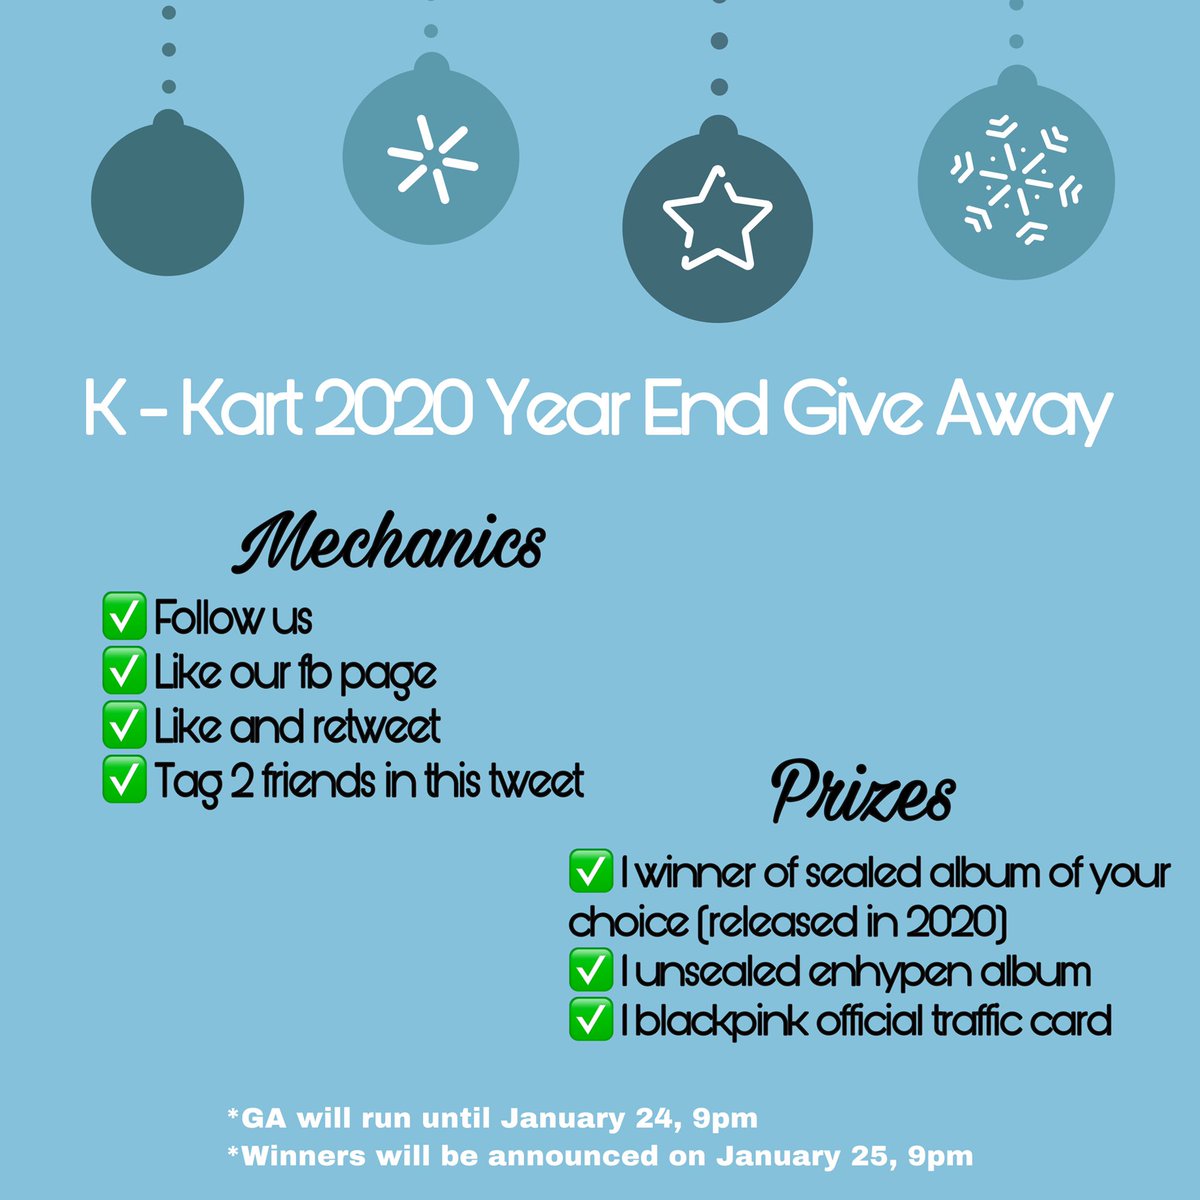 #KKart_GAs As promised, here are the mechanics for our Year End Give Away! You will have a chance to win: ☑️ 1 sealed album of your choice ☑️ 1 unsealed enhypen album ☑️ 1 blackpink official traffic card *Please see mechanics and promo period below. Happy holidays everyone~!!